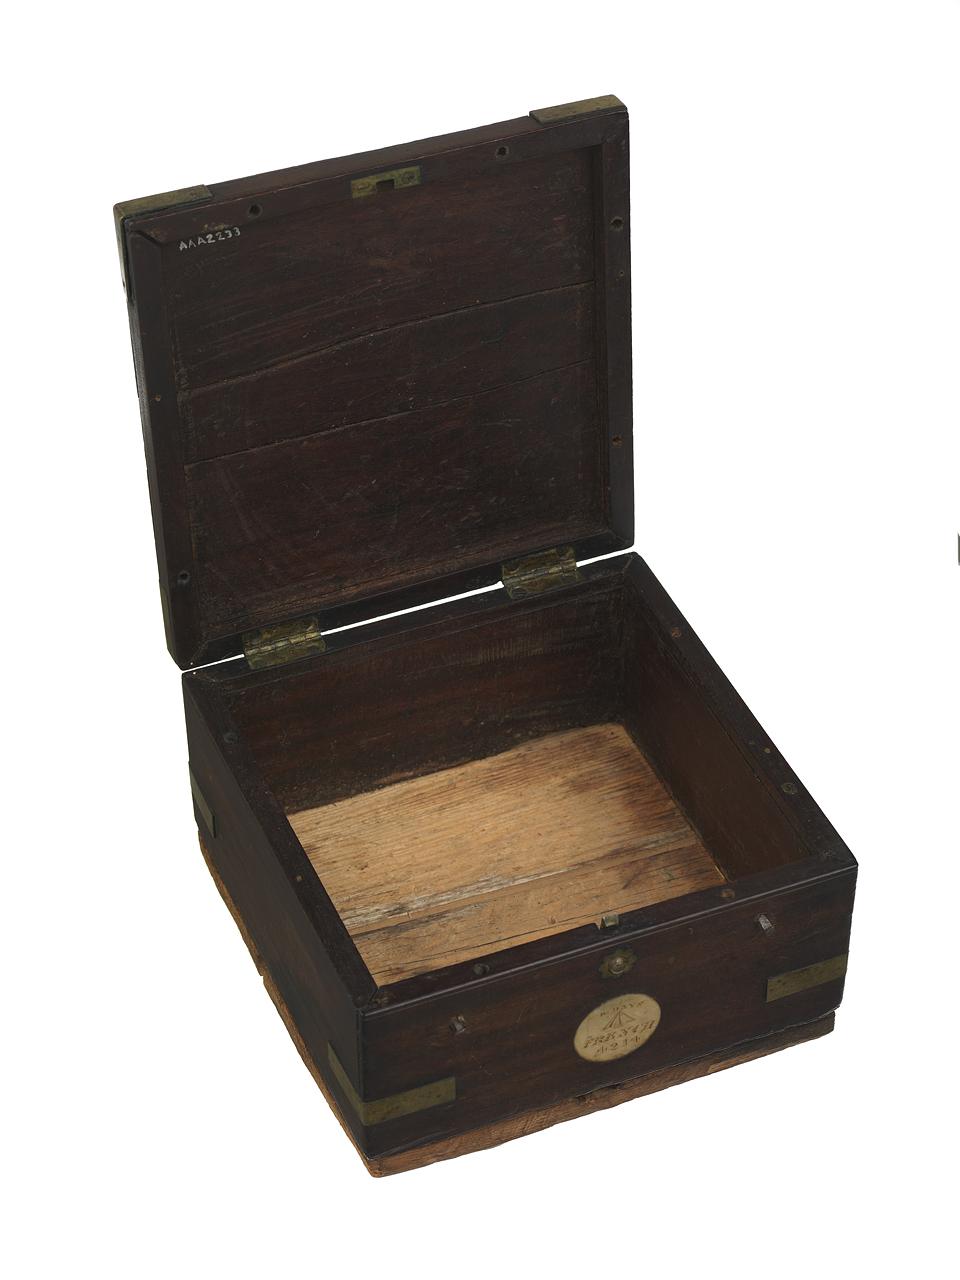 Image of a small square mahogany box with its lid open